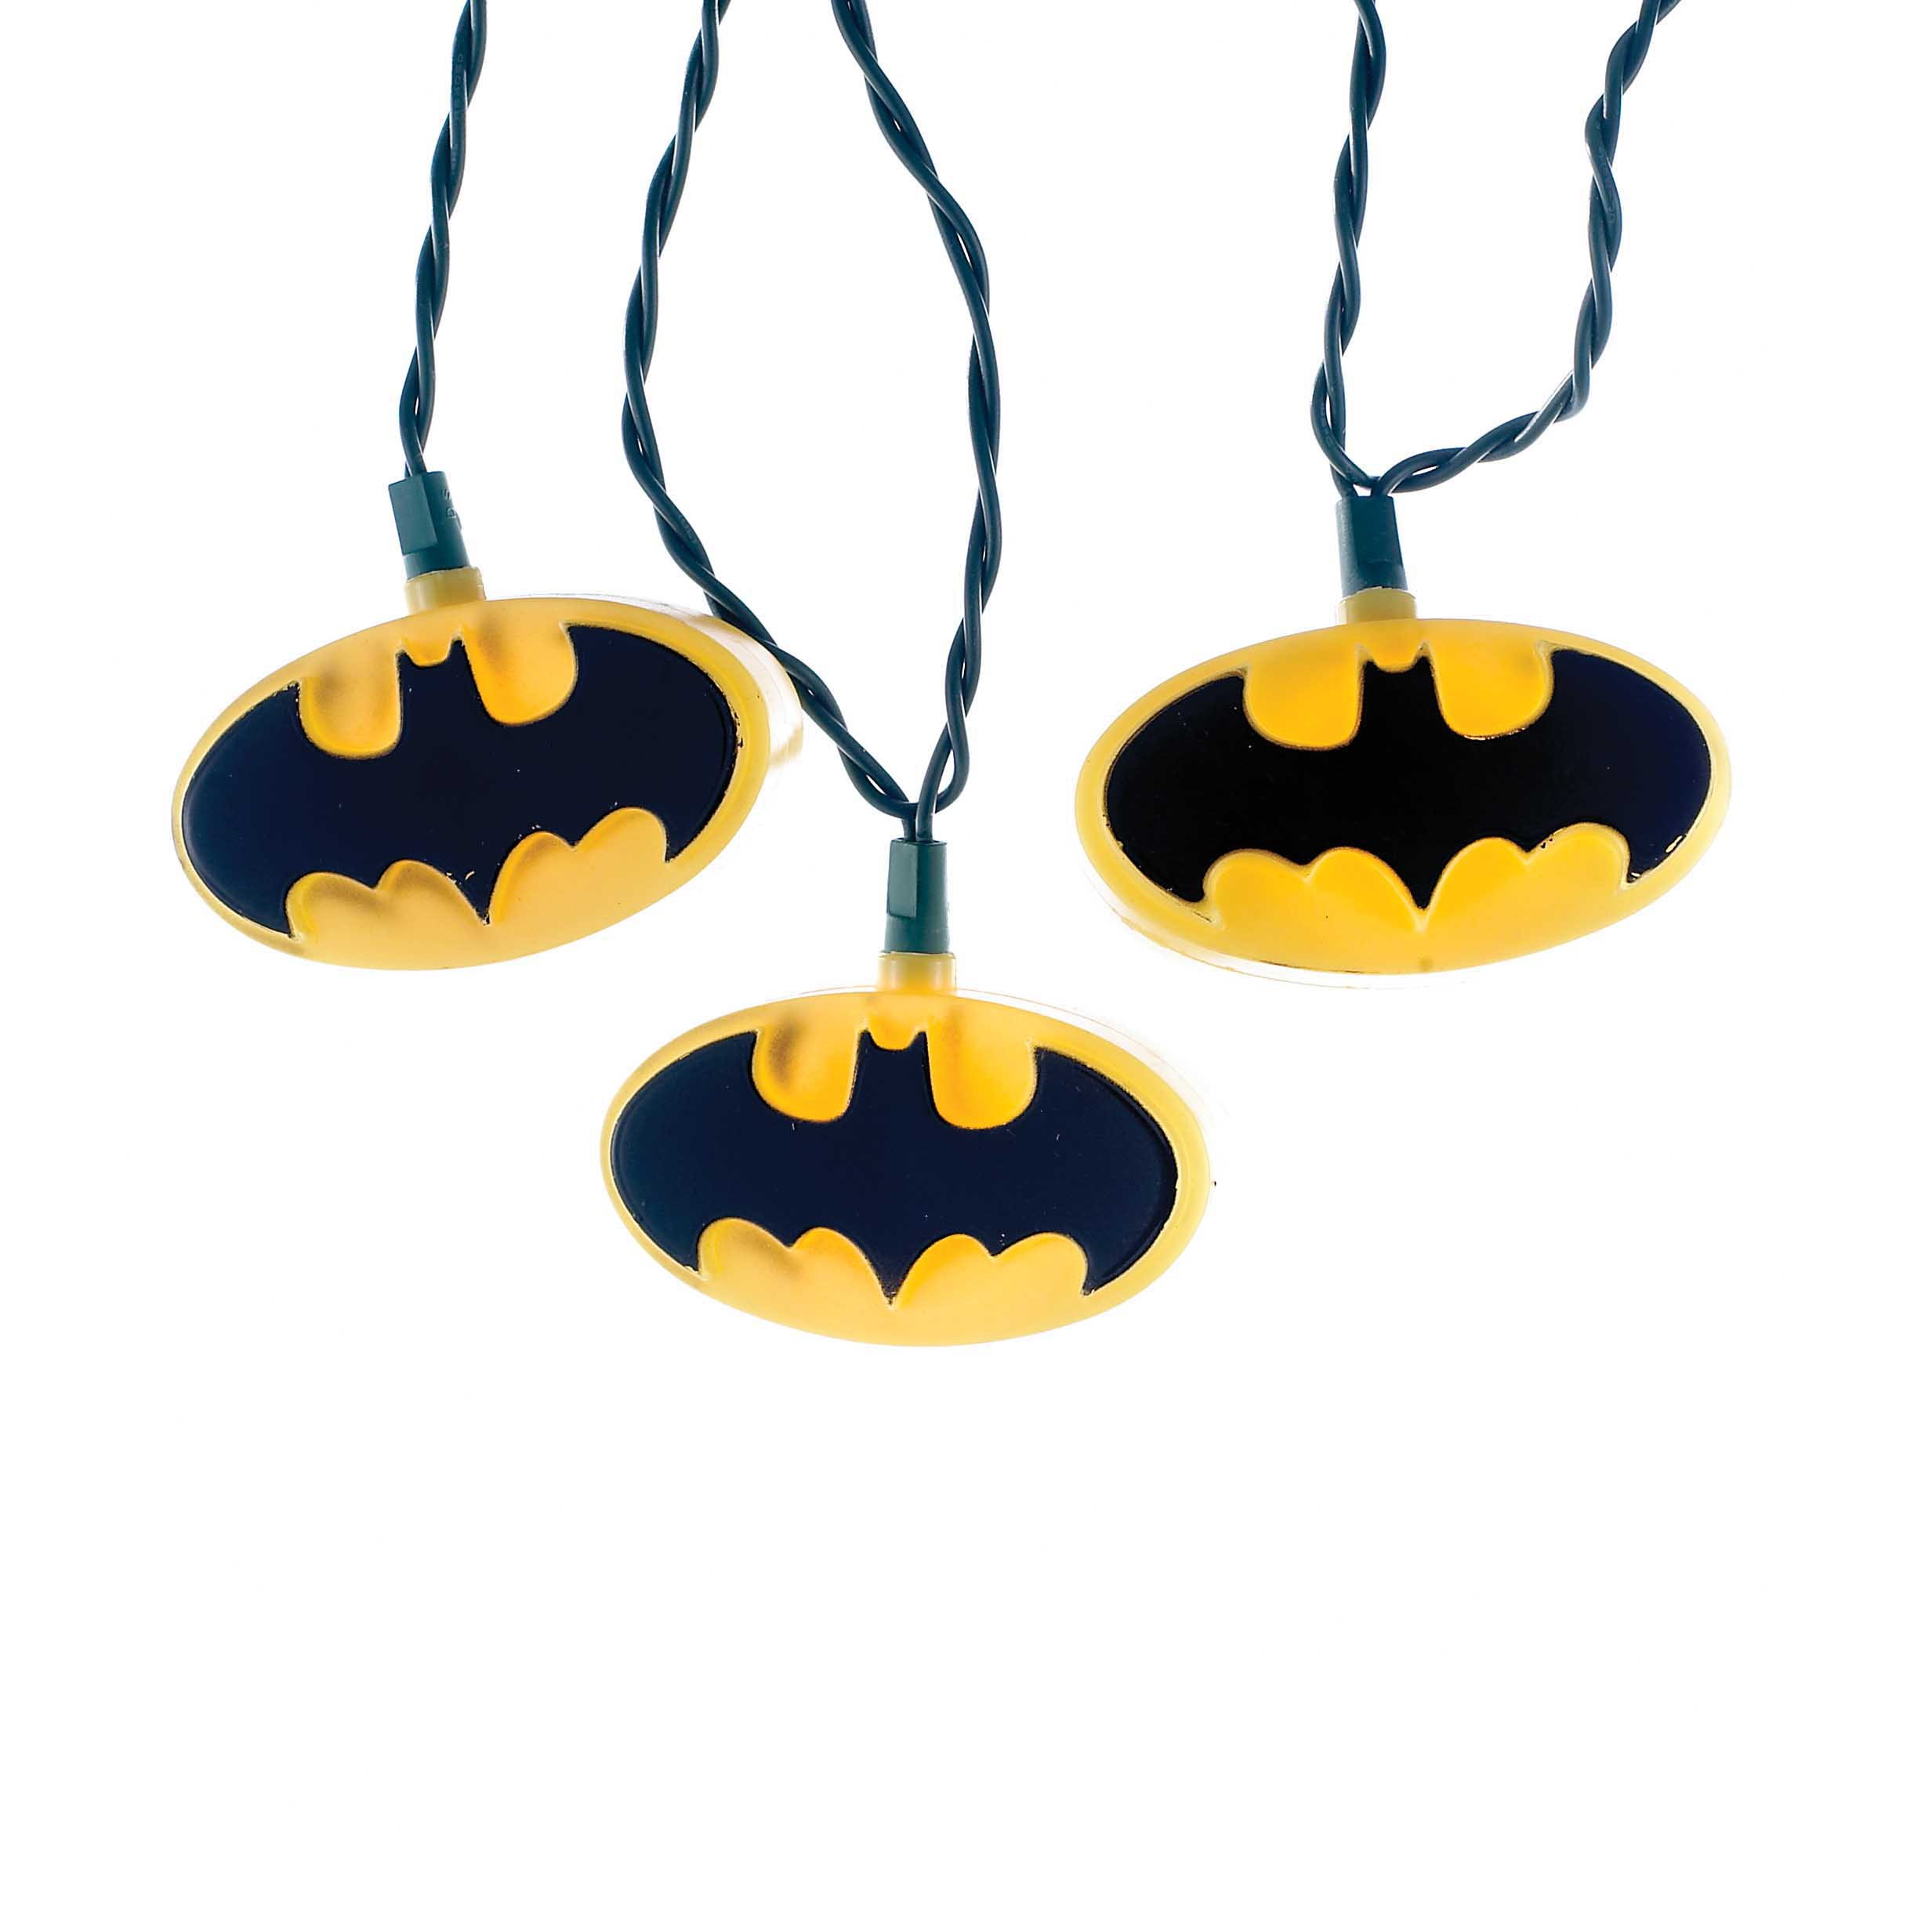 KurtAdlerBatmanlights Celebrate The Holiday Season With Gifts From WB